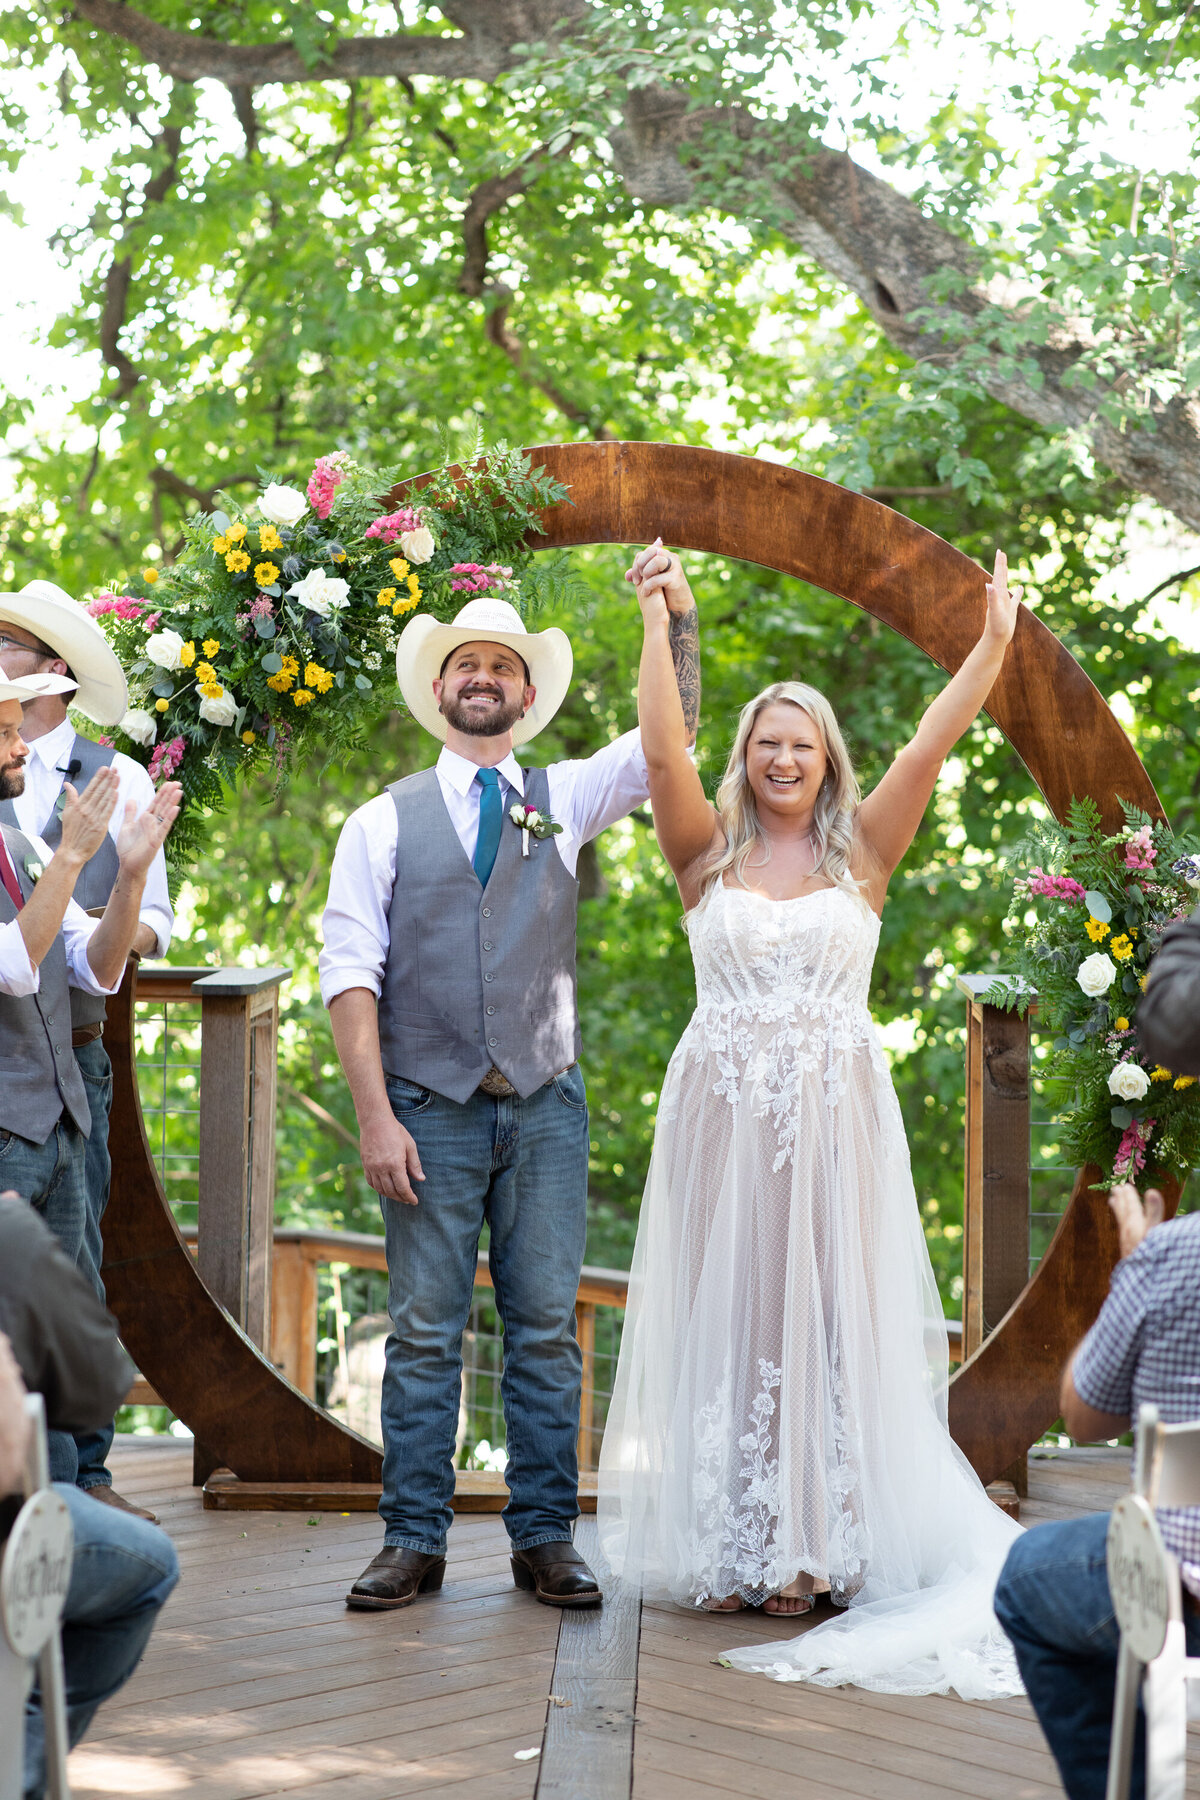 An Austin wedding photographer captures the moment as a bride and groom stand in front of a wooden arch during their wedding ceremony.